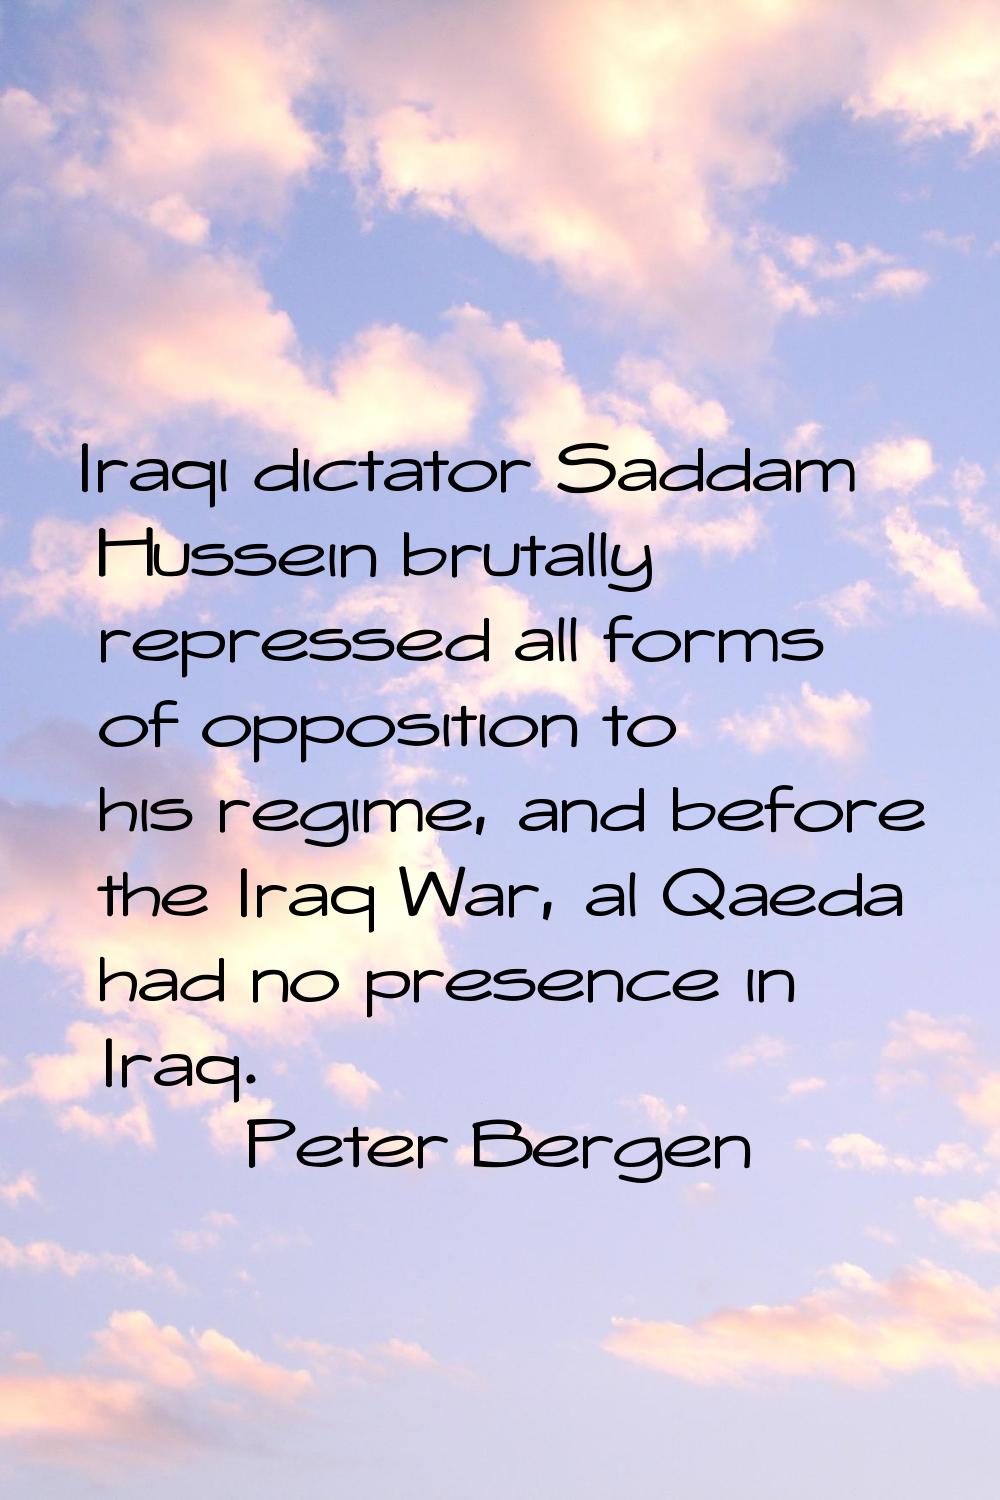 Iraqi dictator Saddam Hussein brutally repressed all forms of opposition to his regime, and before 